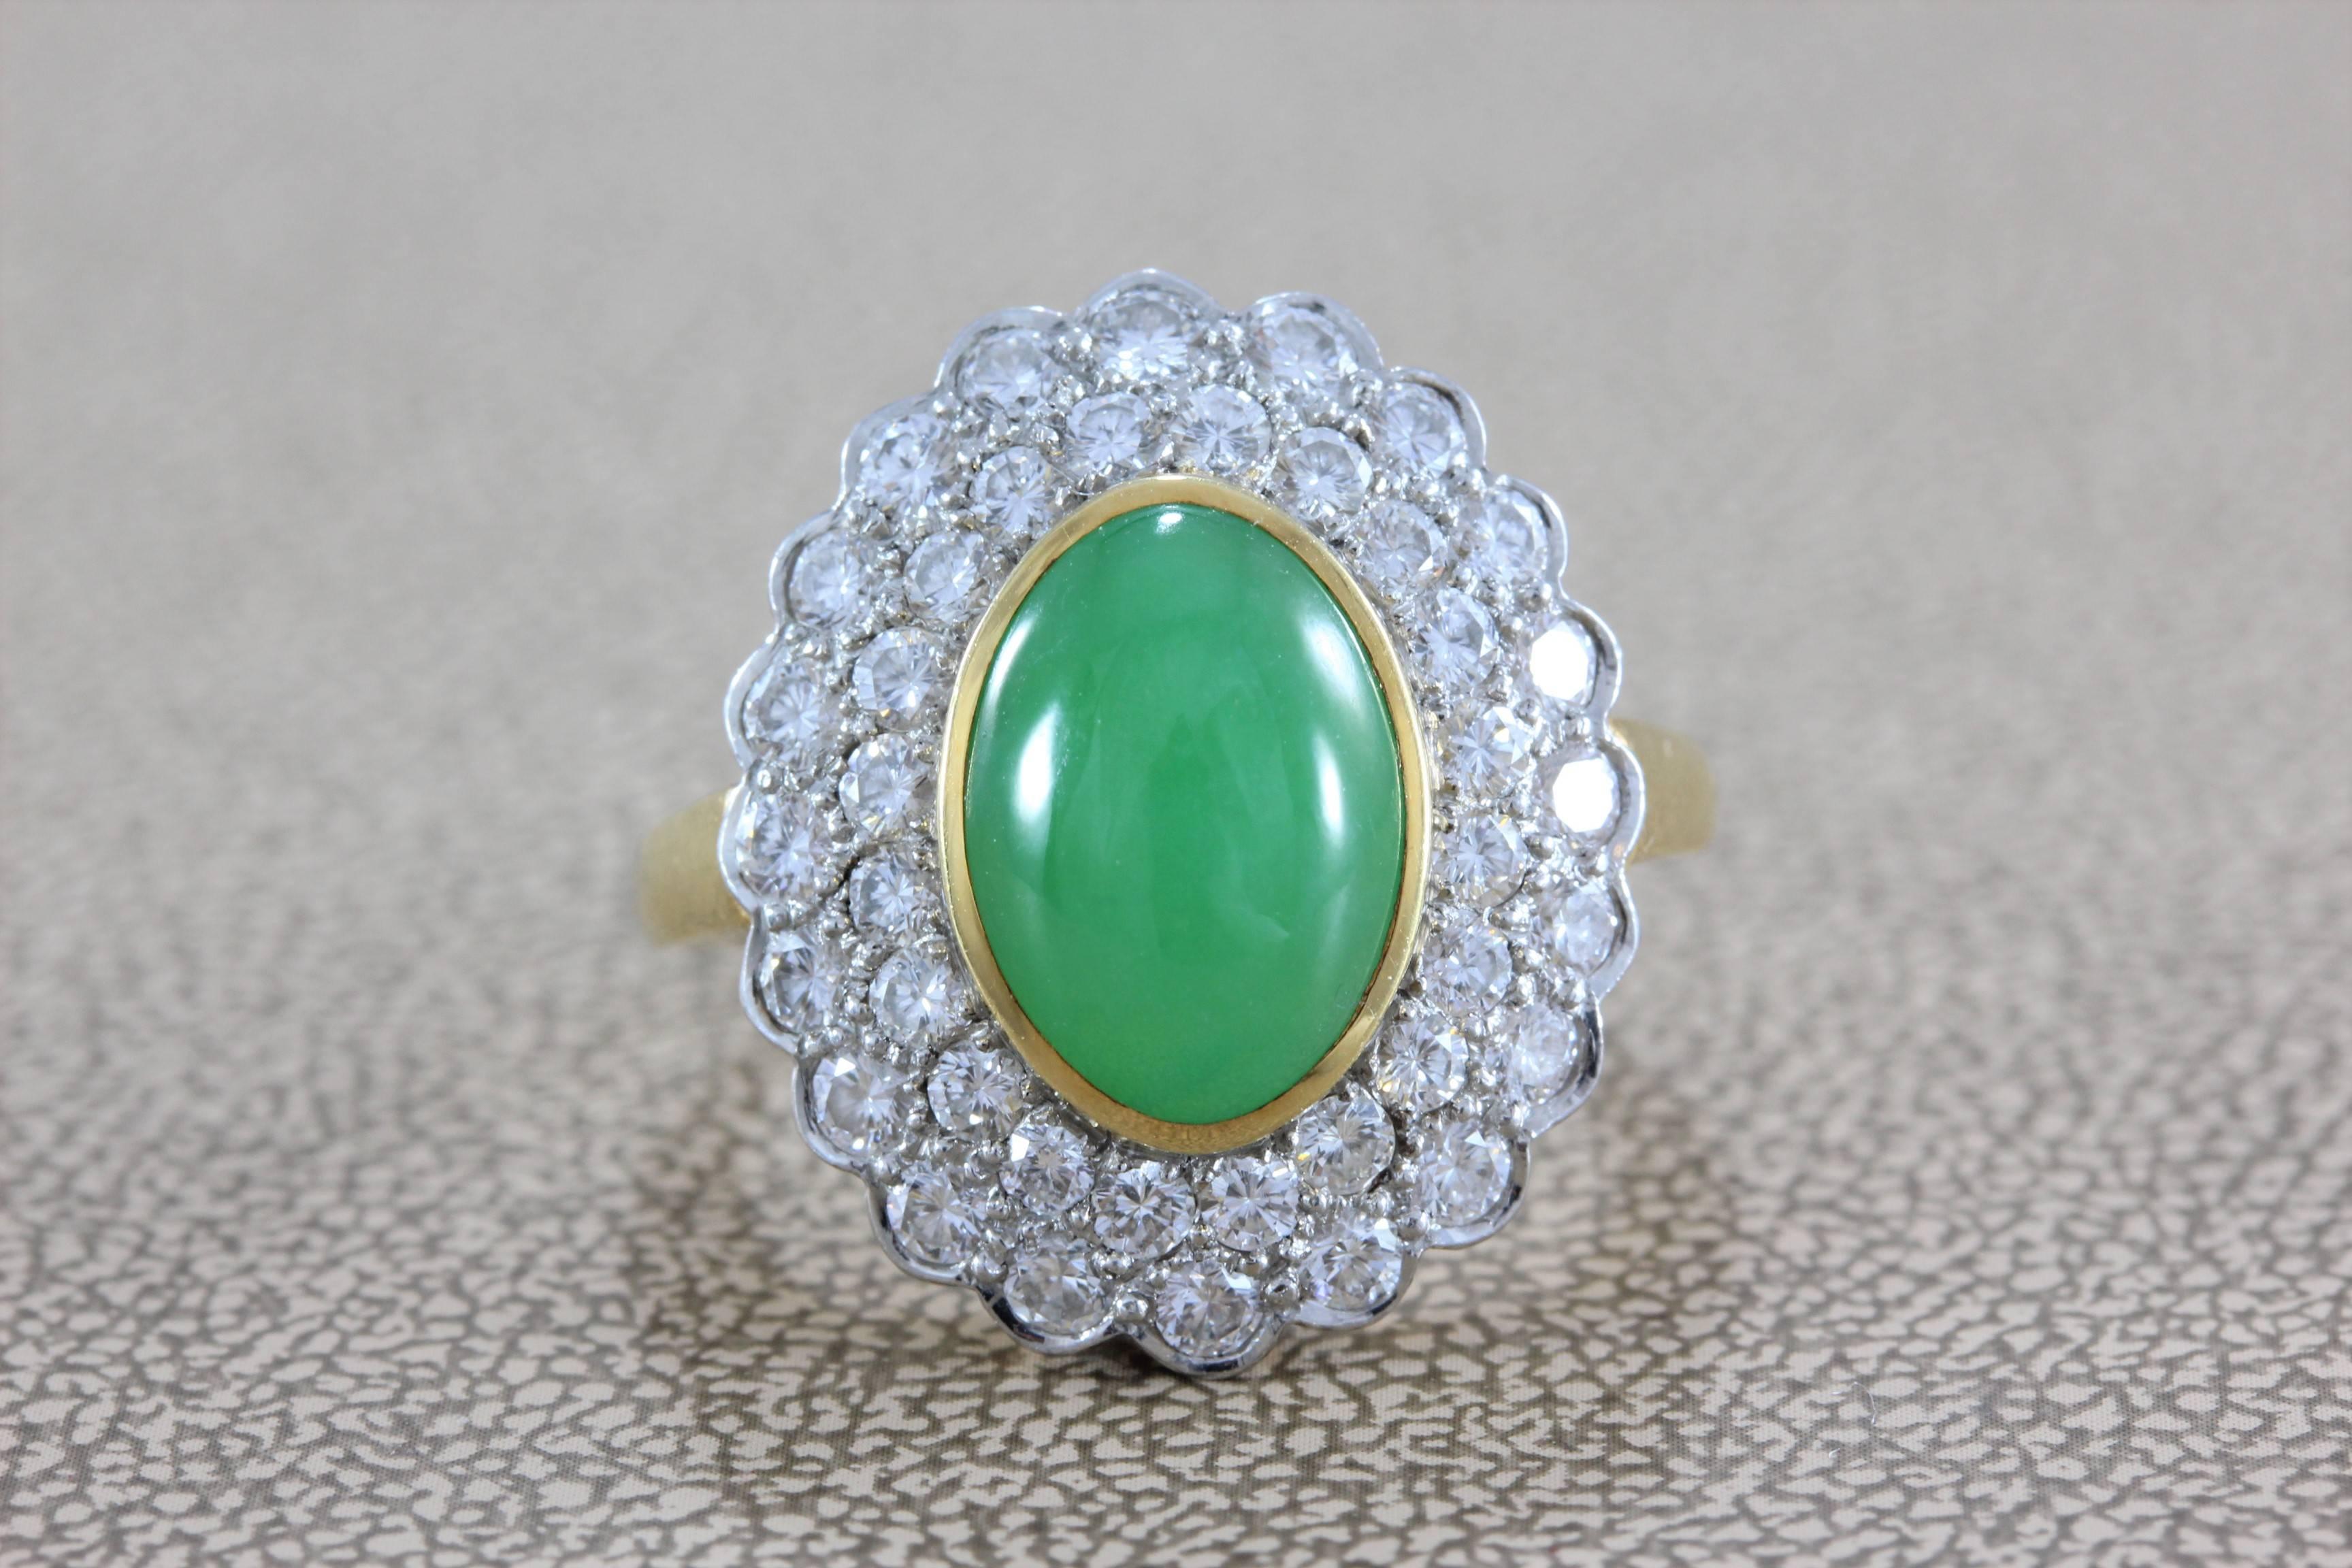 A lovely piece by Gumps, this ring features a 2.55 carat molted green translucent piece of natural jadeite jade. Accenting the jade are over 1 carat of round cut VS quality diamonds set in 18K yellow gold. Signed Gumps.

Size 6 ½ 
